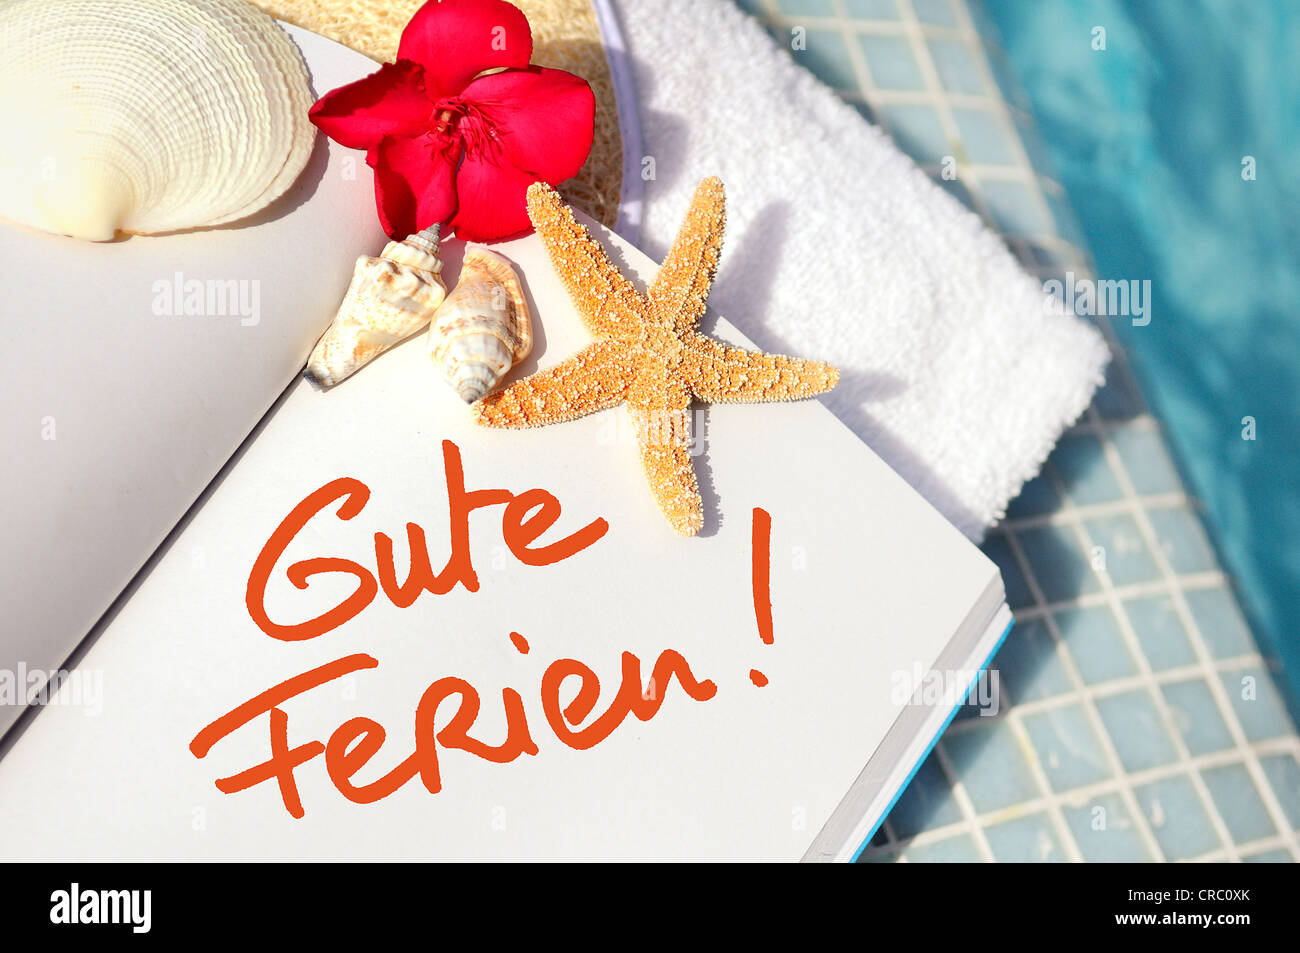 open book with strfish outdoor with swiming pool background Stock Photo